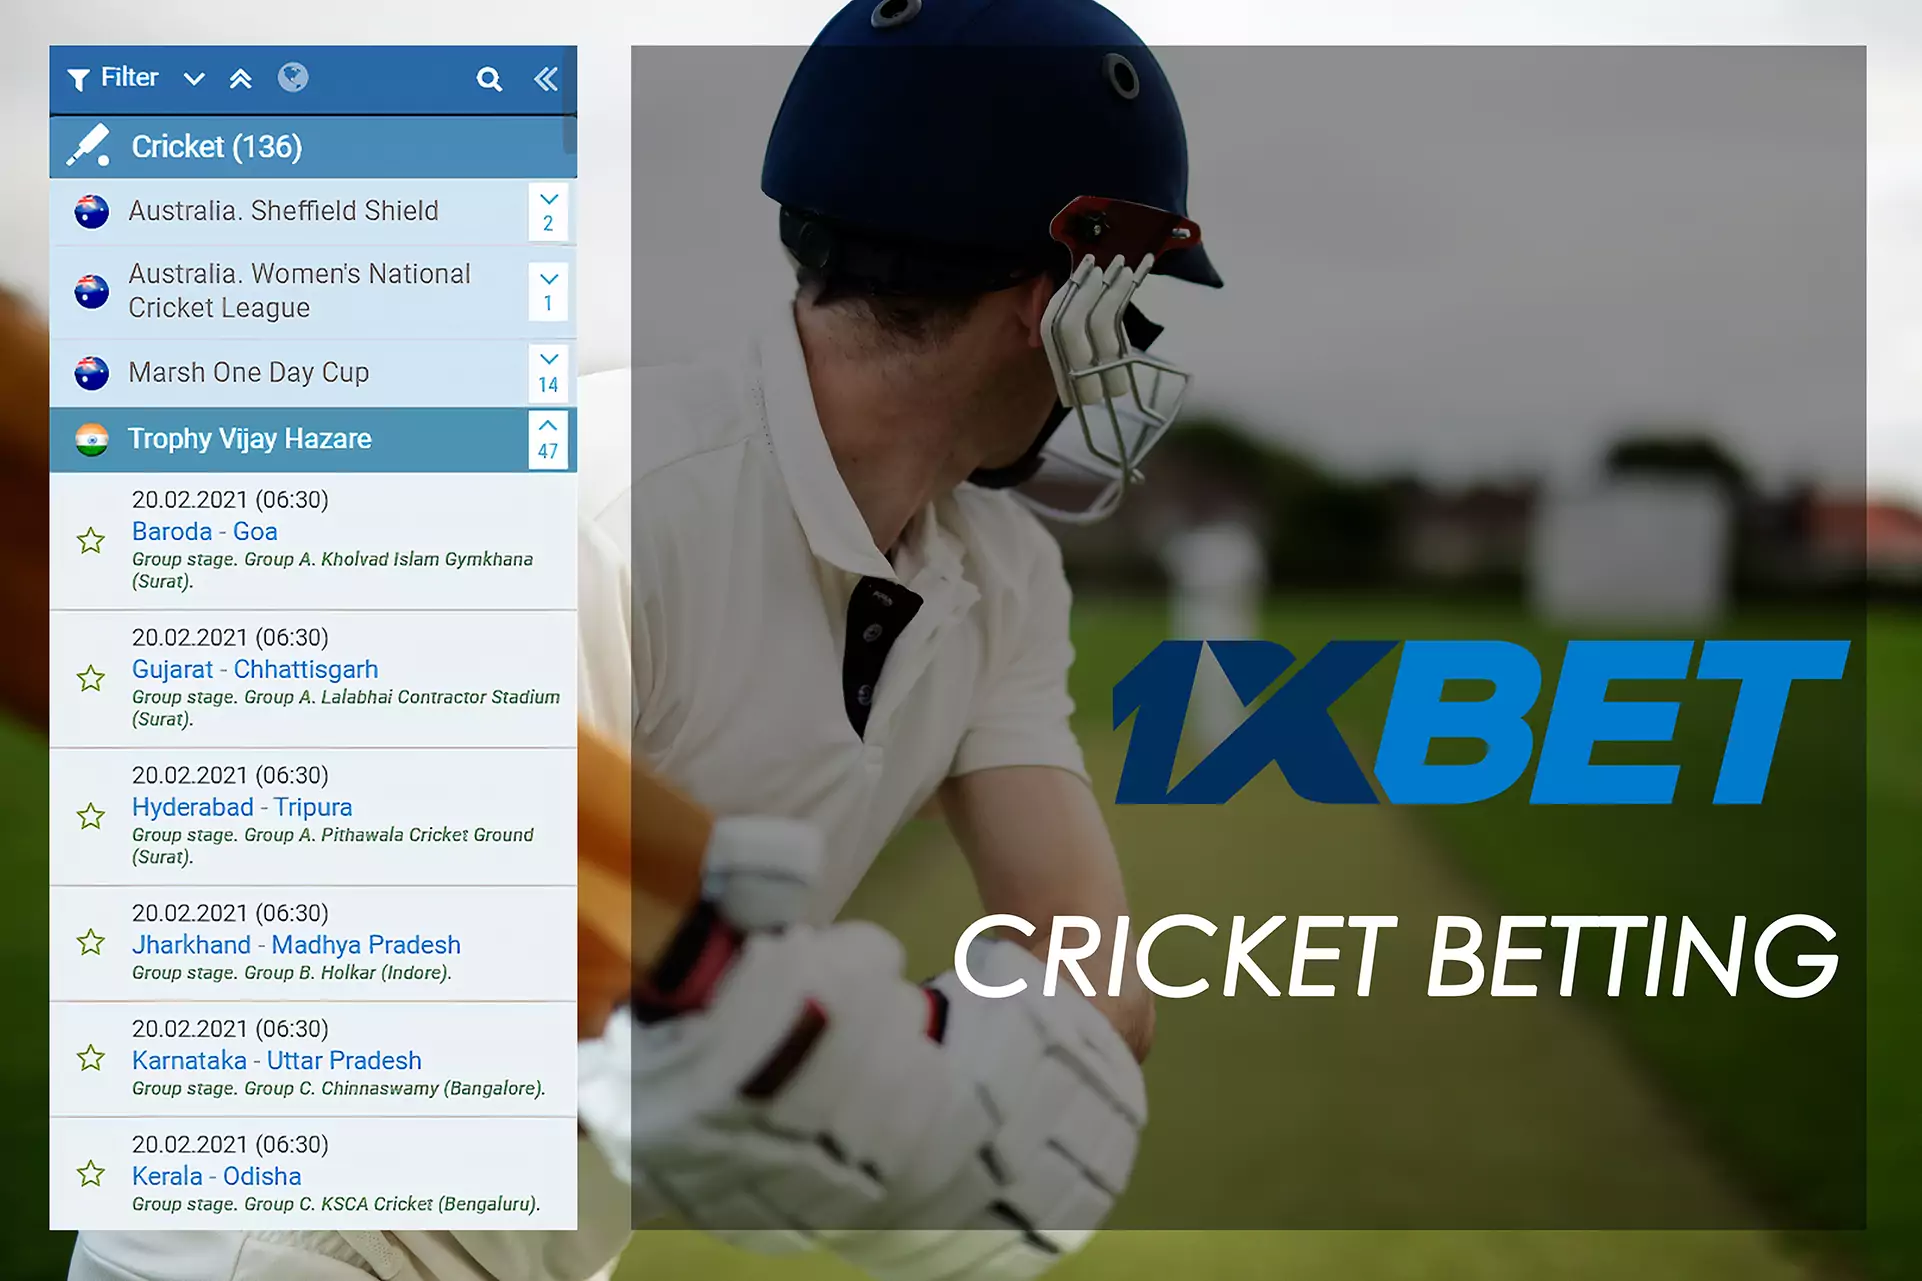 The 1xBet app offers a variety of cricket betting options in India.